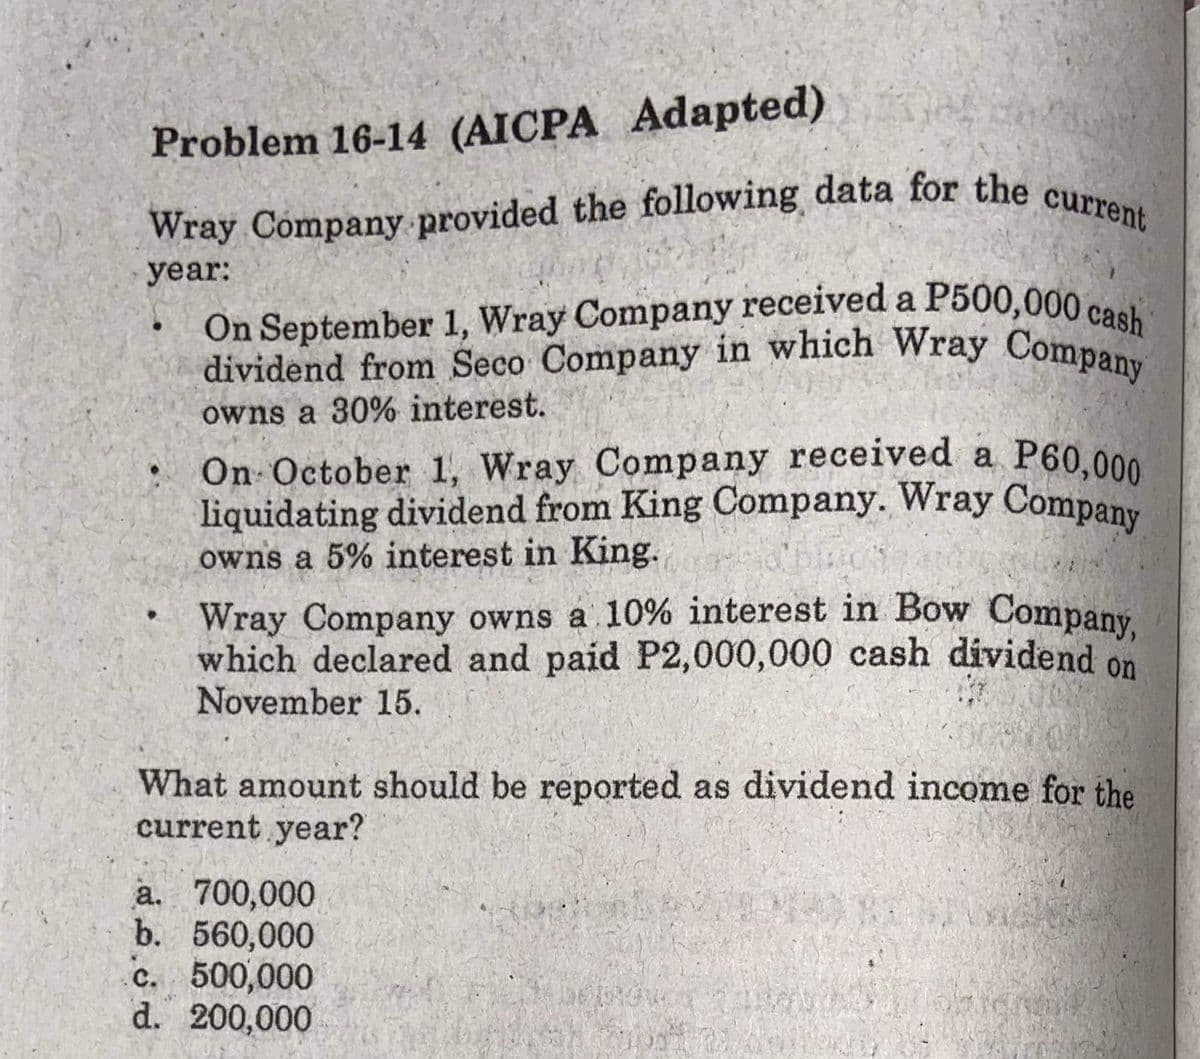 On September 1, Wray Company received a P500,000 cash
Wray Company provided the following data for the current
dividend from Seco Company in which Wray Company
liquidating dividend from King Company. Wray Company
Wray Company owns a 10% interest in Bow Company,
On October 1, Wray Company received a P60,000
Problem 16-14 (AICPA Adapted)
year:
On September 1, Wray Company received a P500,000co
owns a 30% interest.
On October 1, Wray Company received a
owns a 5% interest in King.
Wray Company owns a 10% interest in Bow Company
which declared and paid P2,000,000 cash dividend on
November 15.
What amount should be reported as dividend income for the
current year?
a. 700,000
b. 560,000
c. 500,000
d. 200,000
